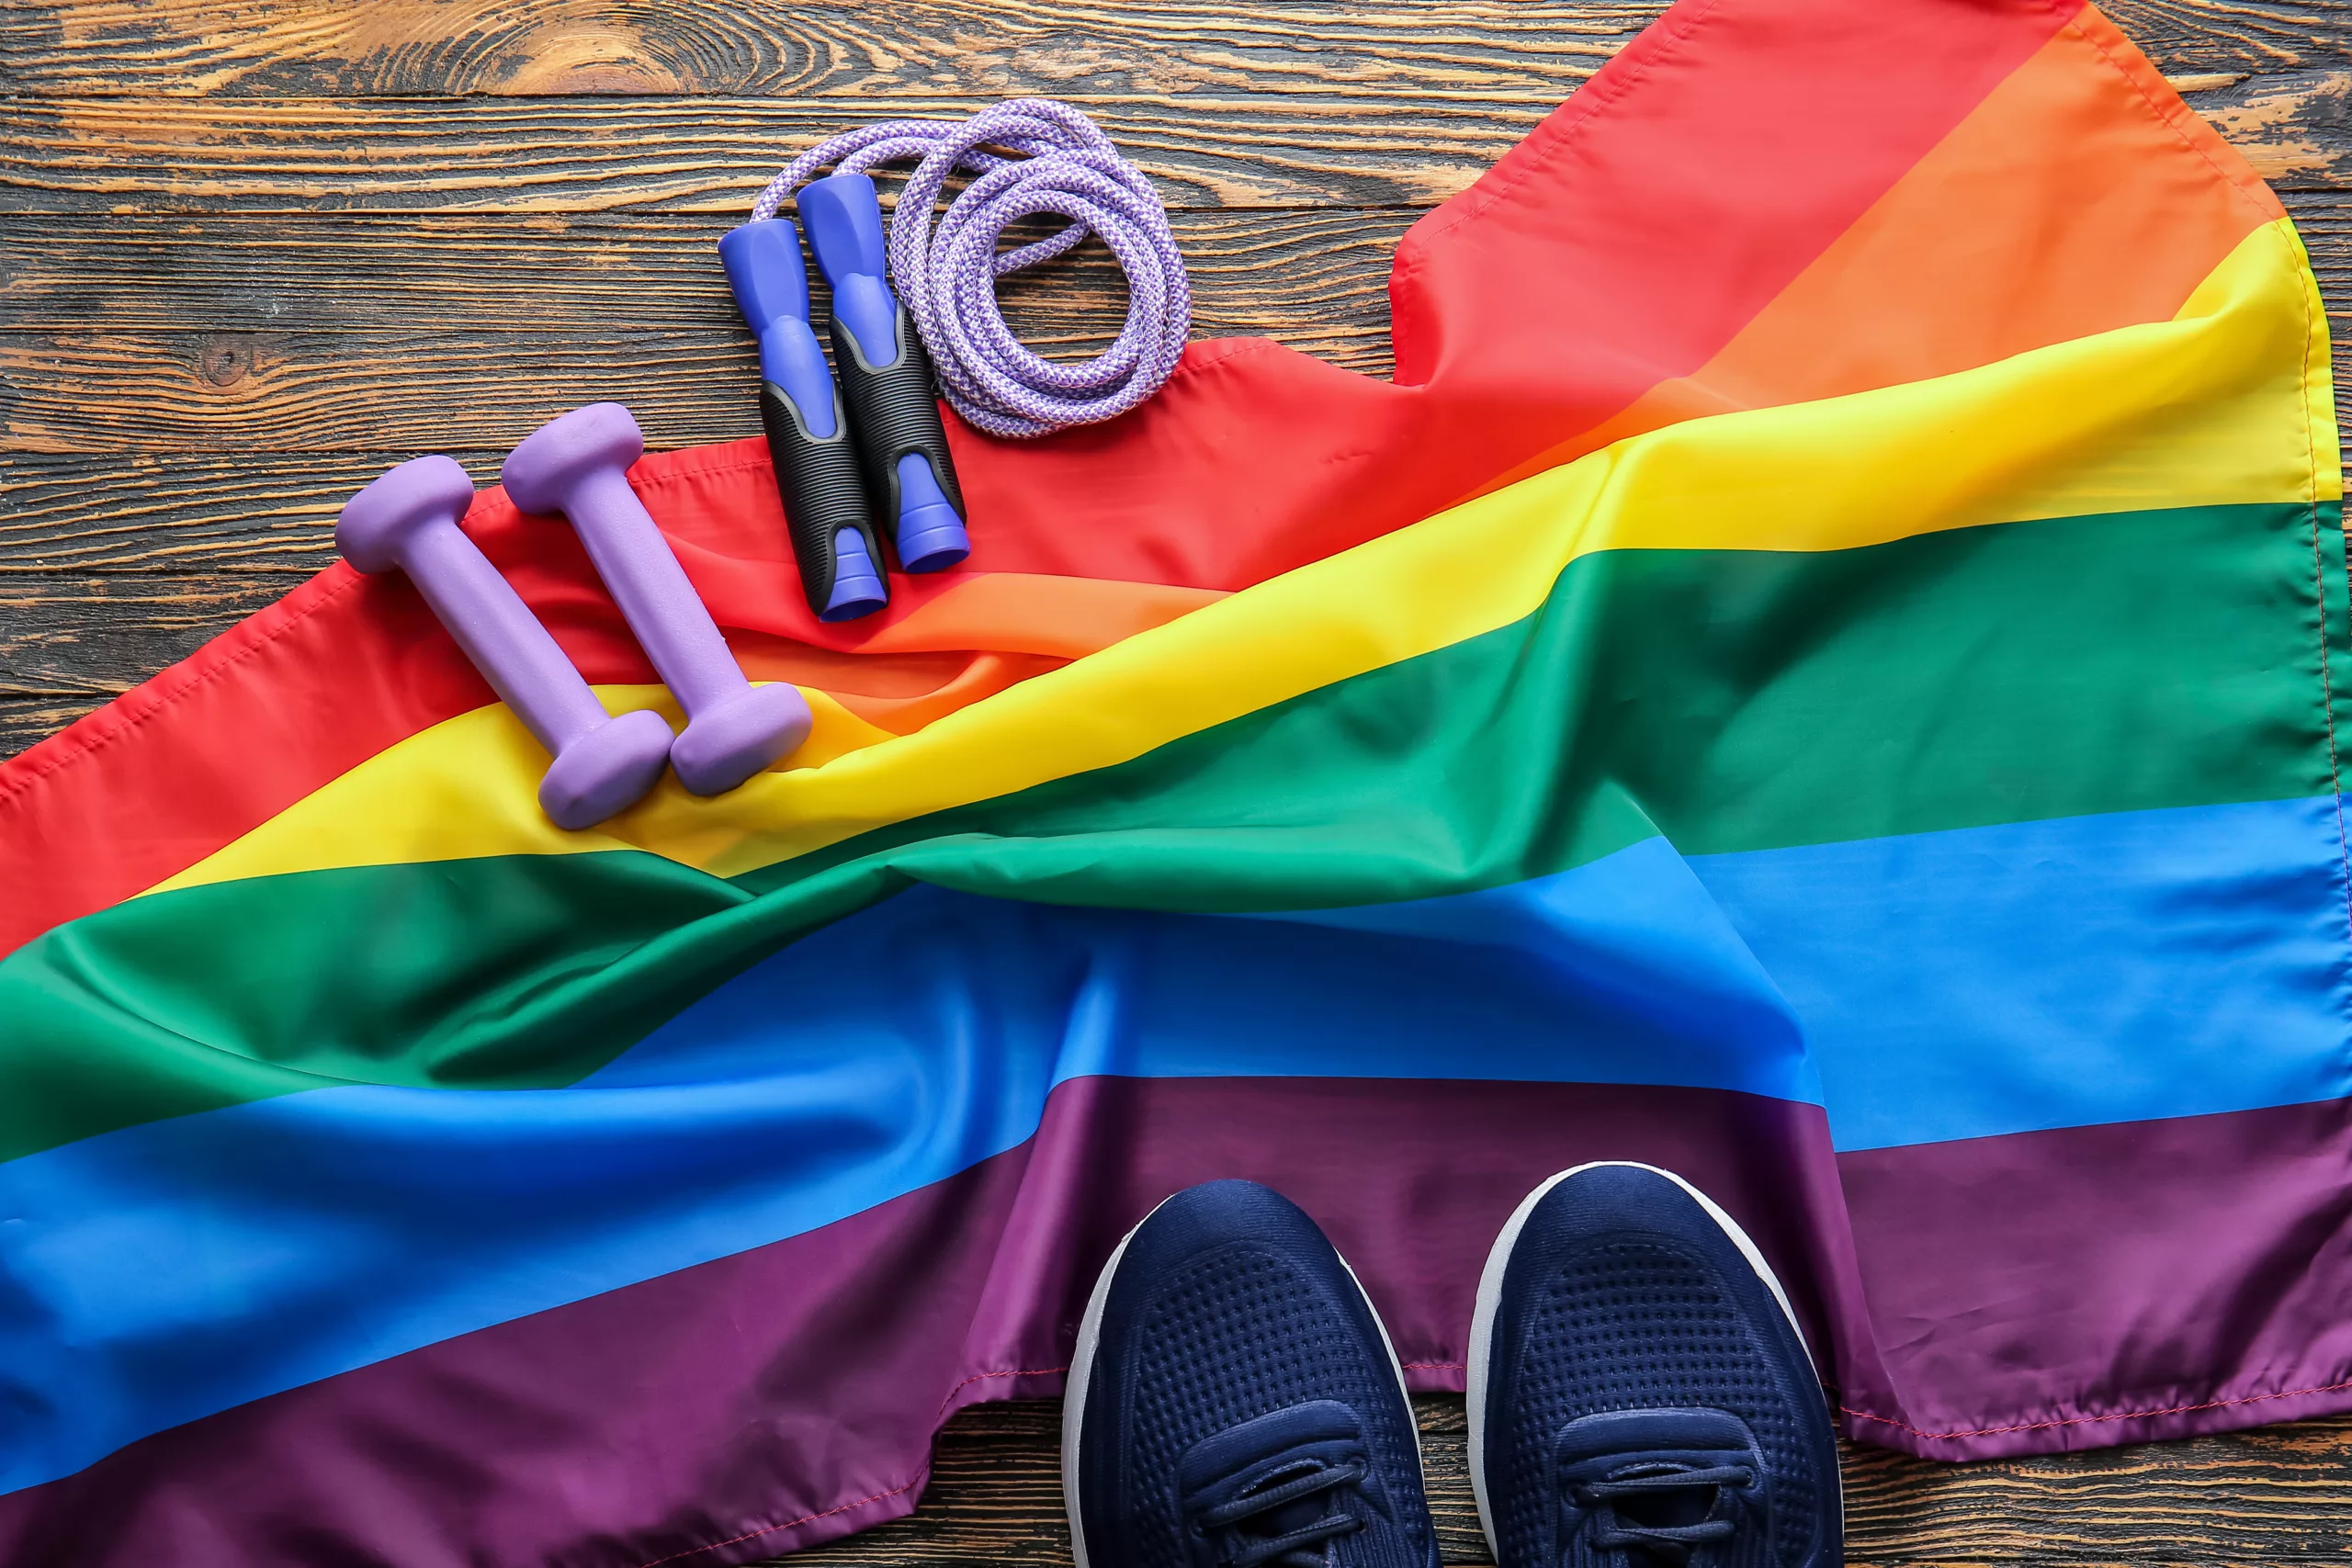 Sports equipment and rainbow LGBT flag on wooden background